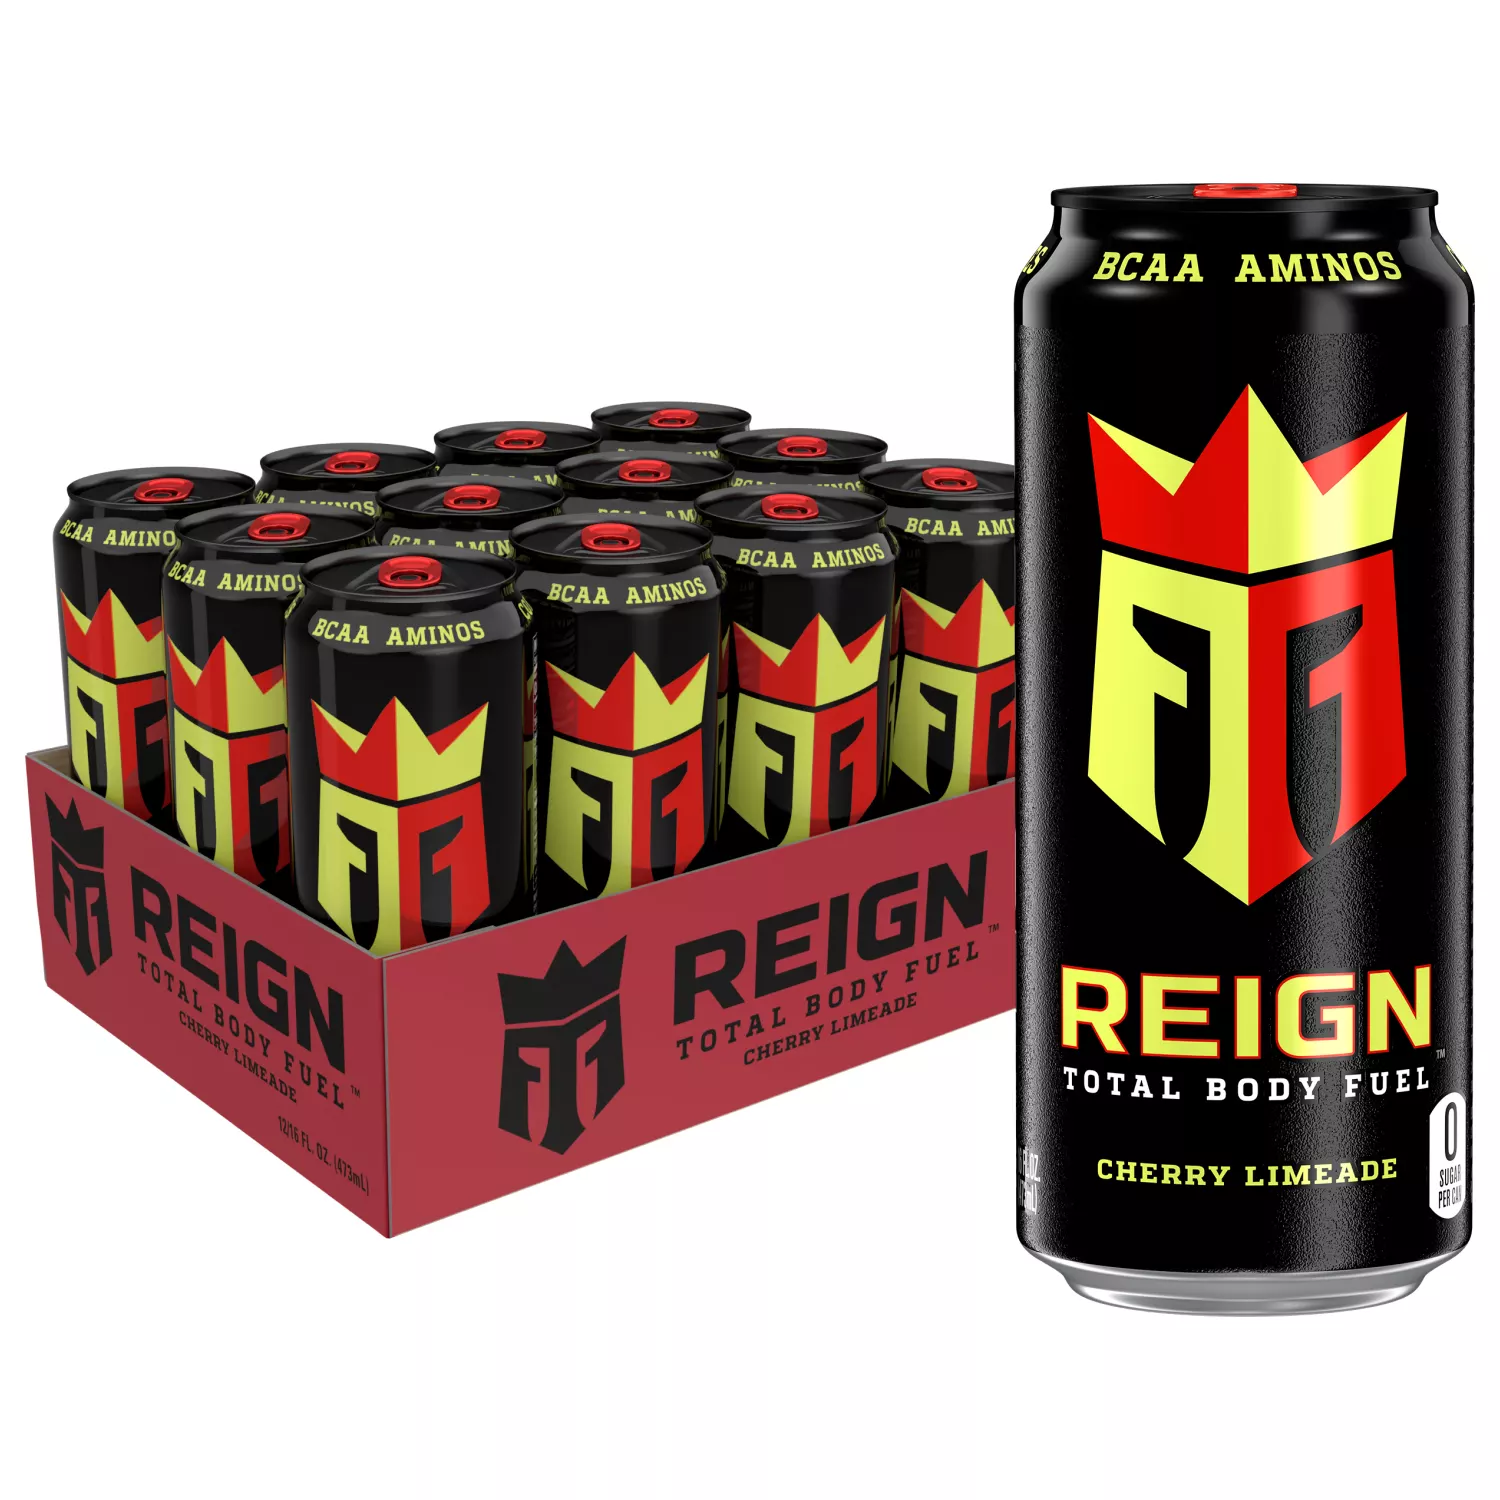 Reign Total Body Fuel Cherry Limeade